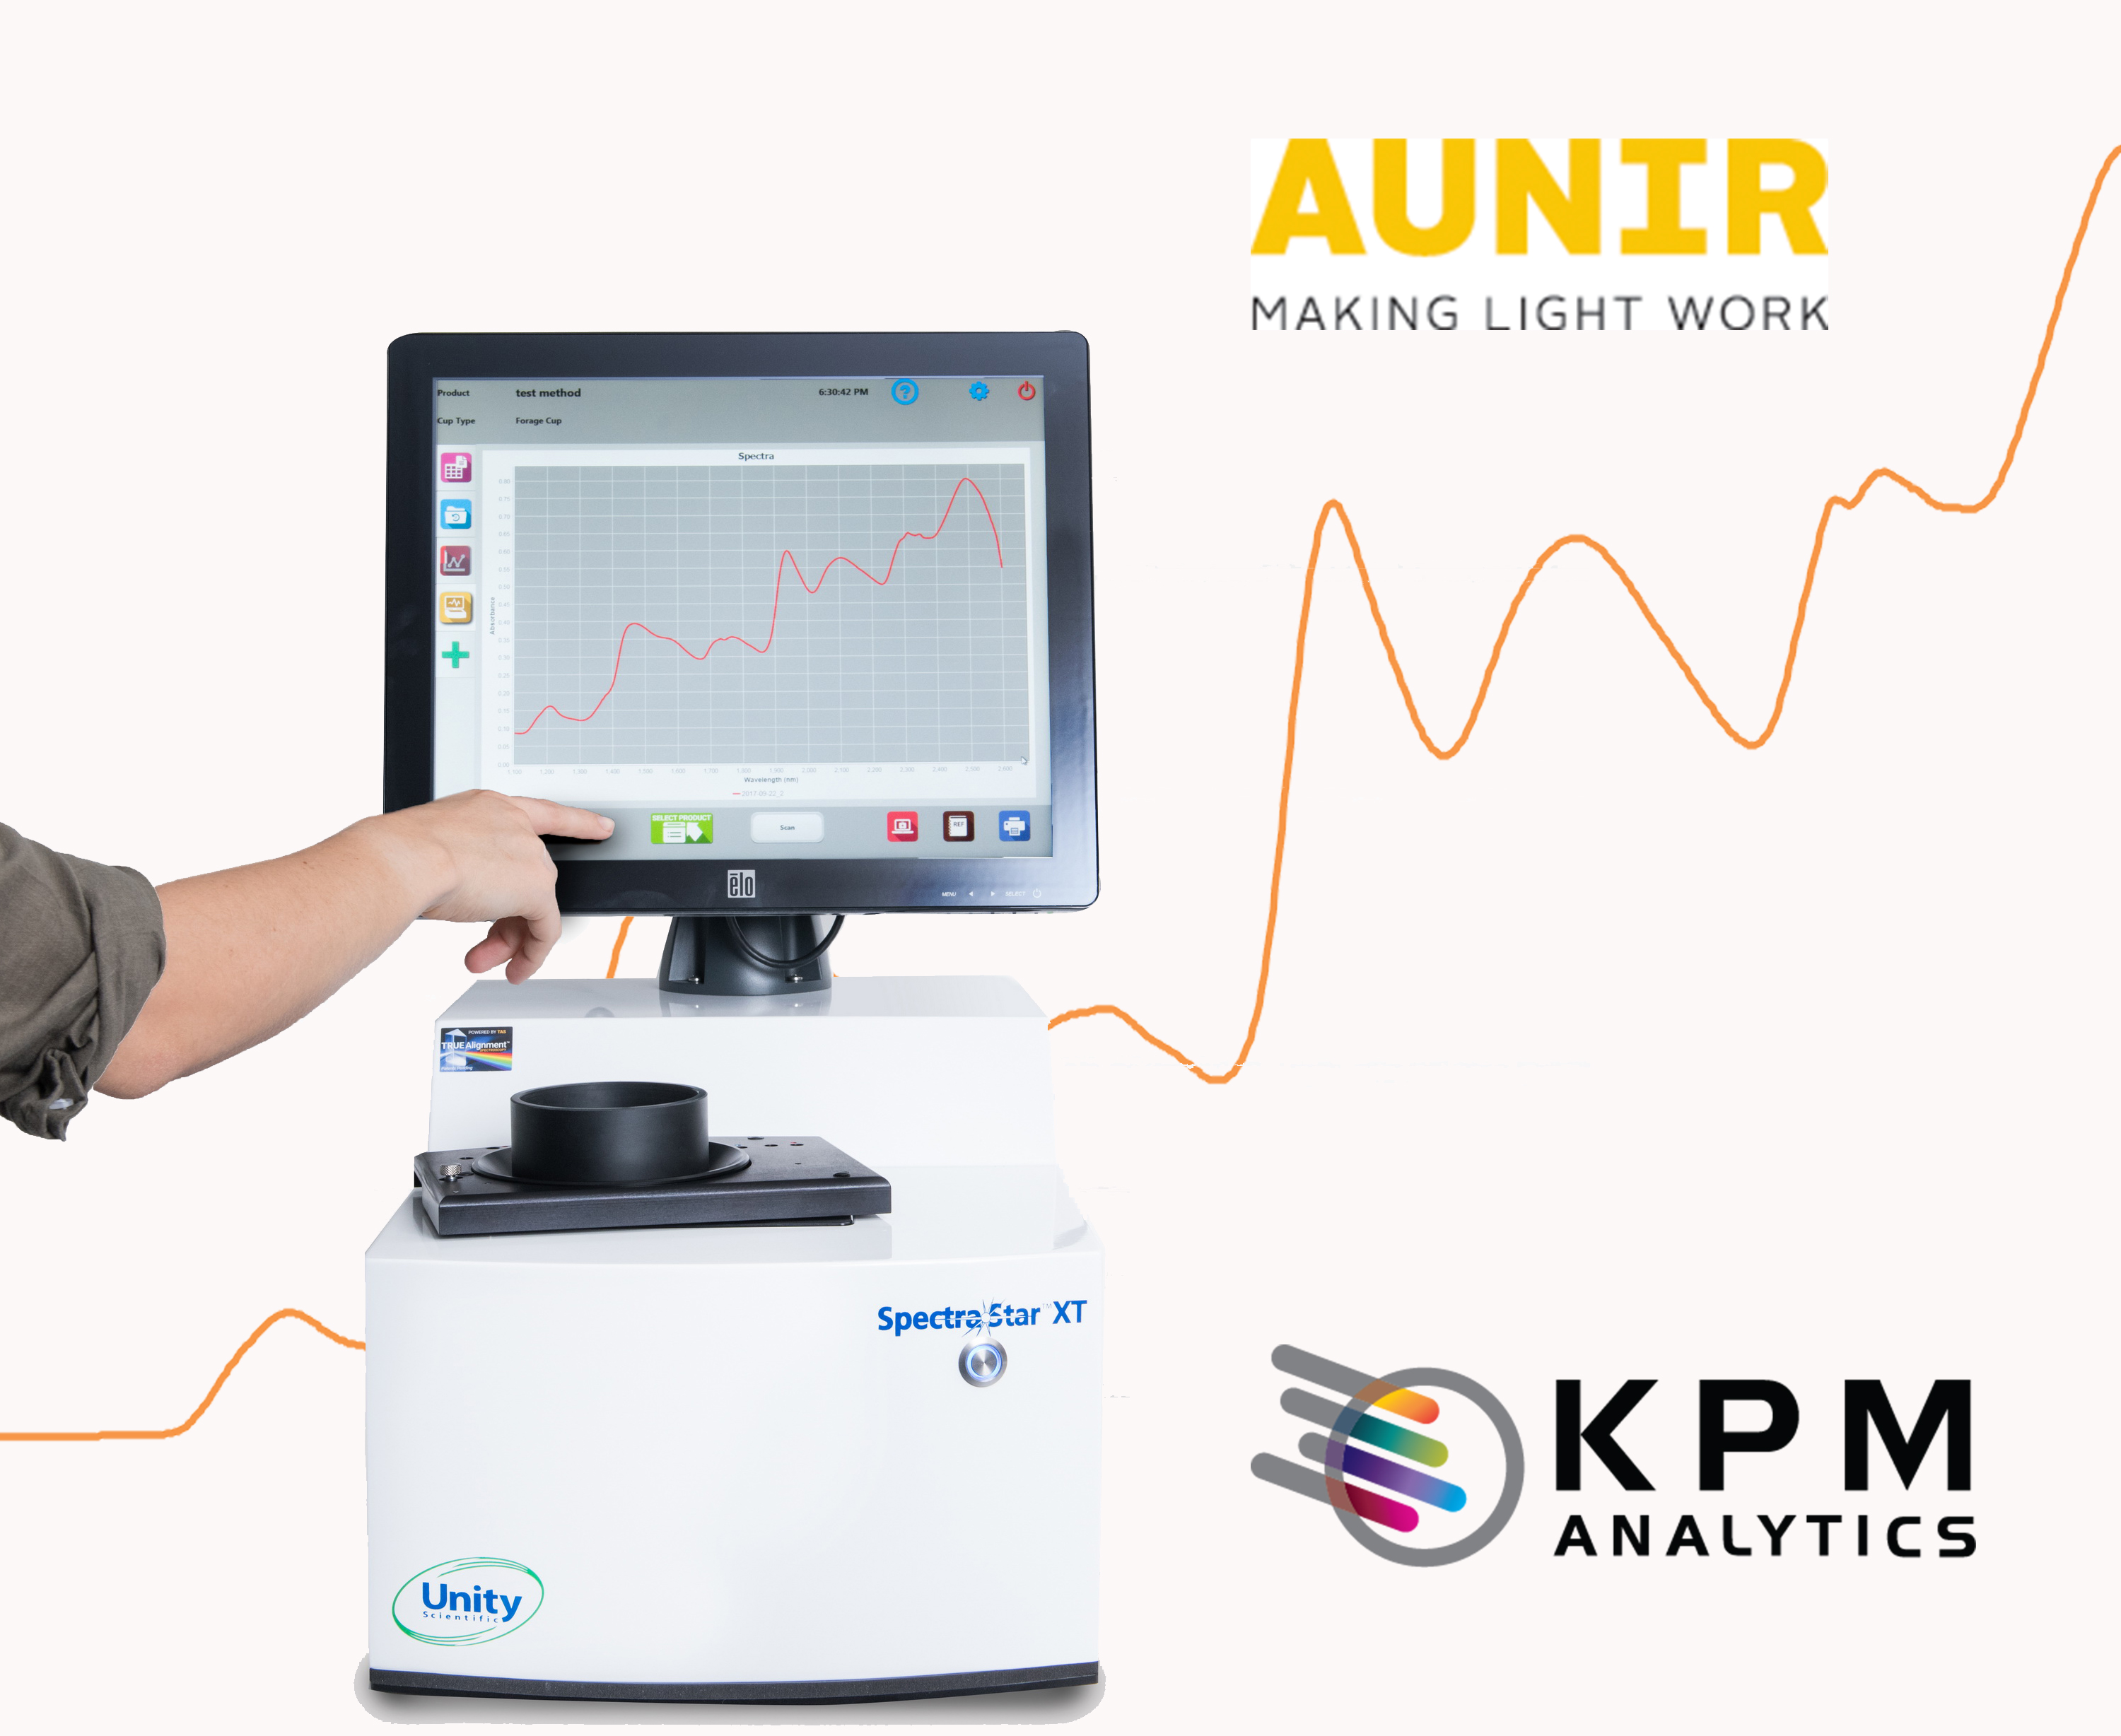 The Unity Scientific SpectraStar XT is one of the many NIR analyzers from KPM Analytics that will utilize the INGOT NIR calibration data from AB Vista's Aunir group.